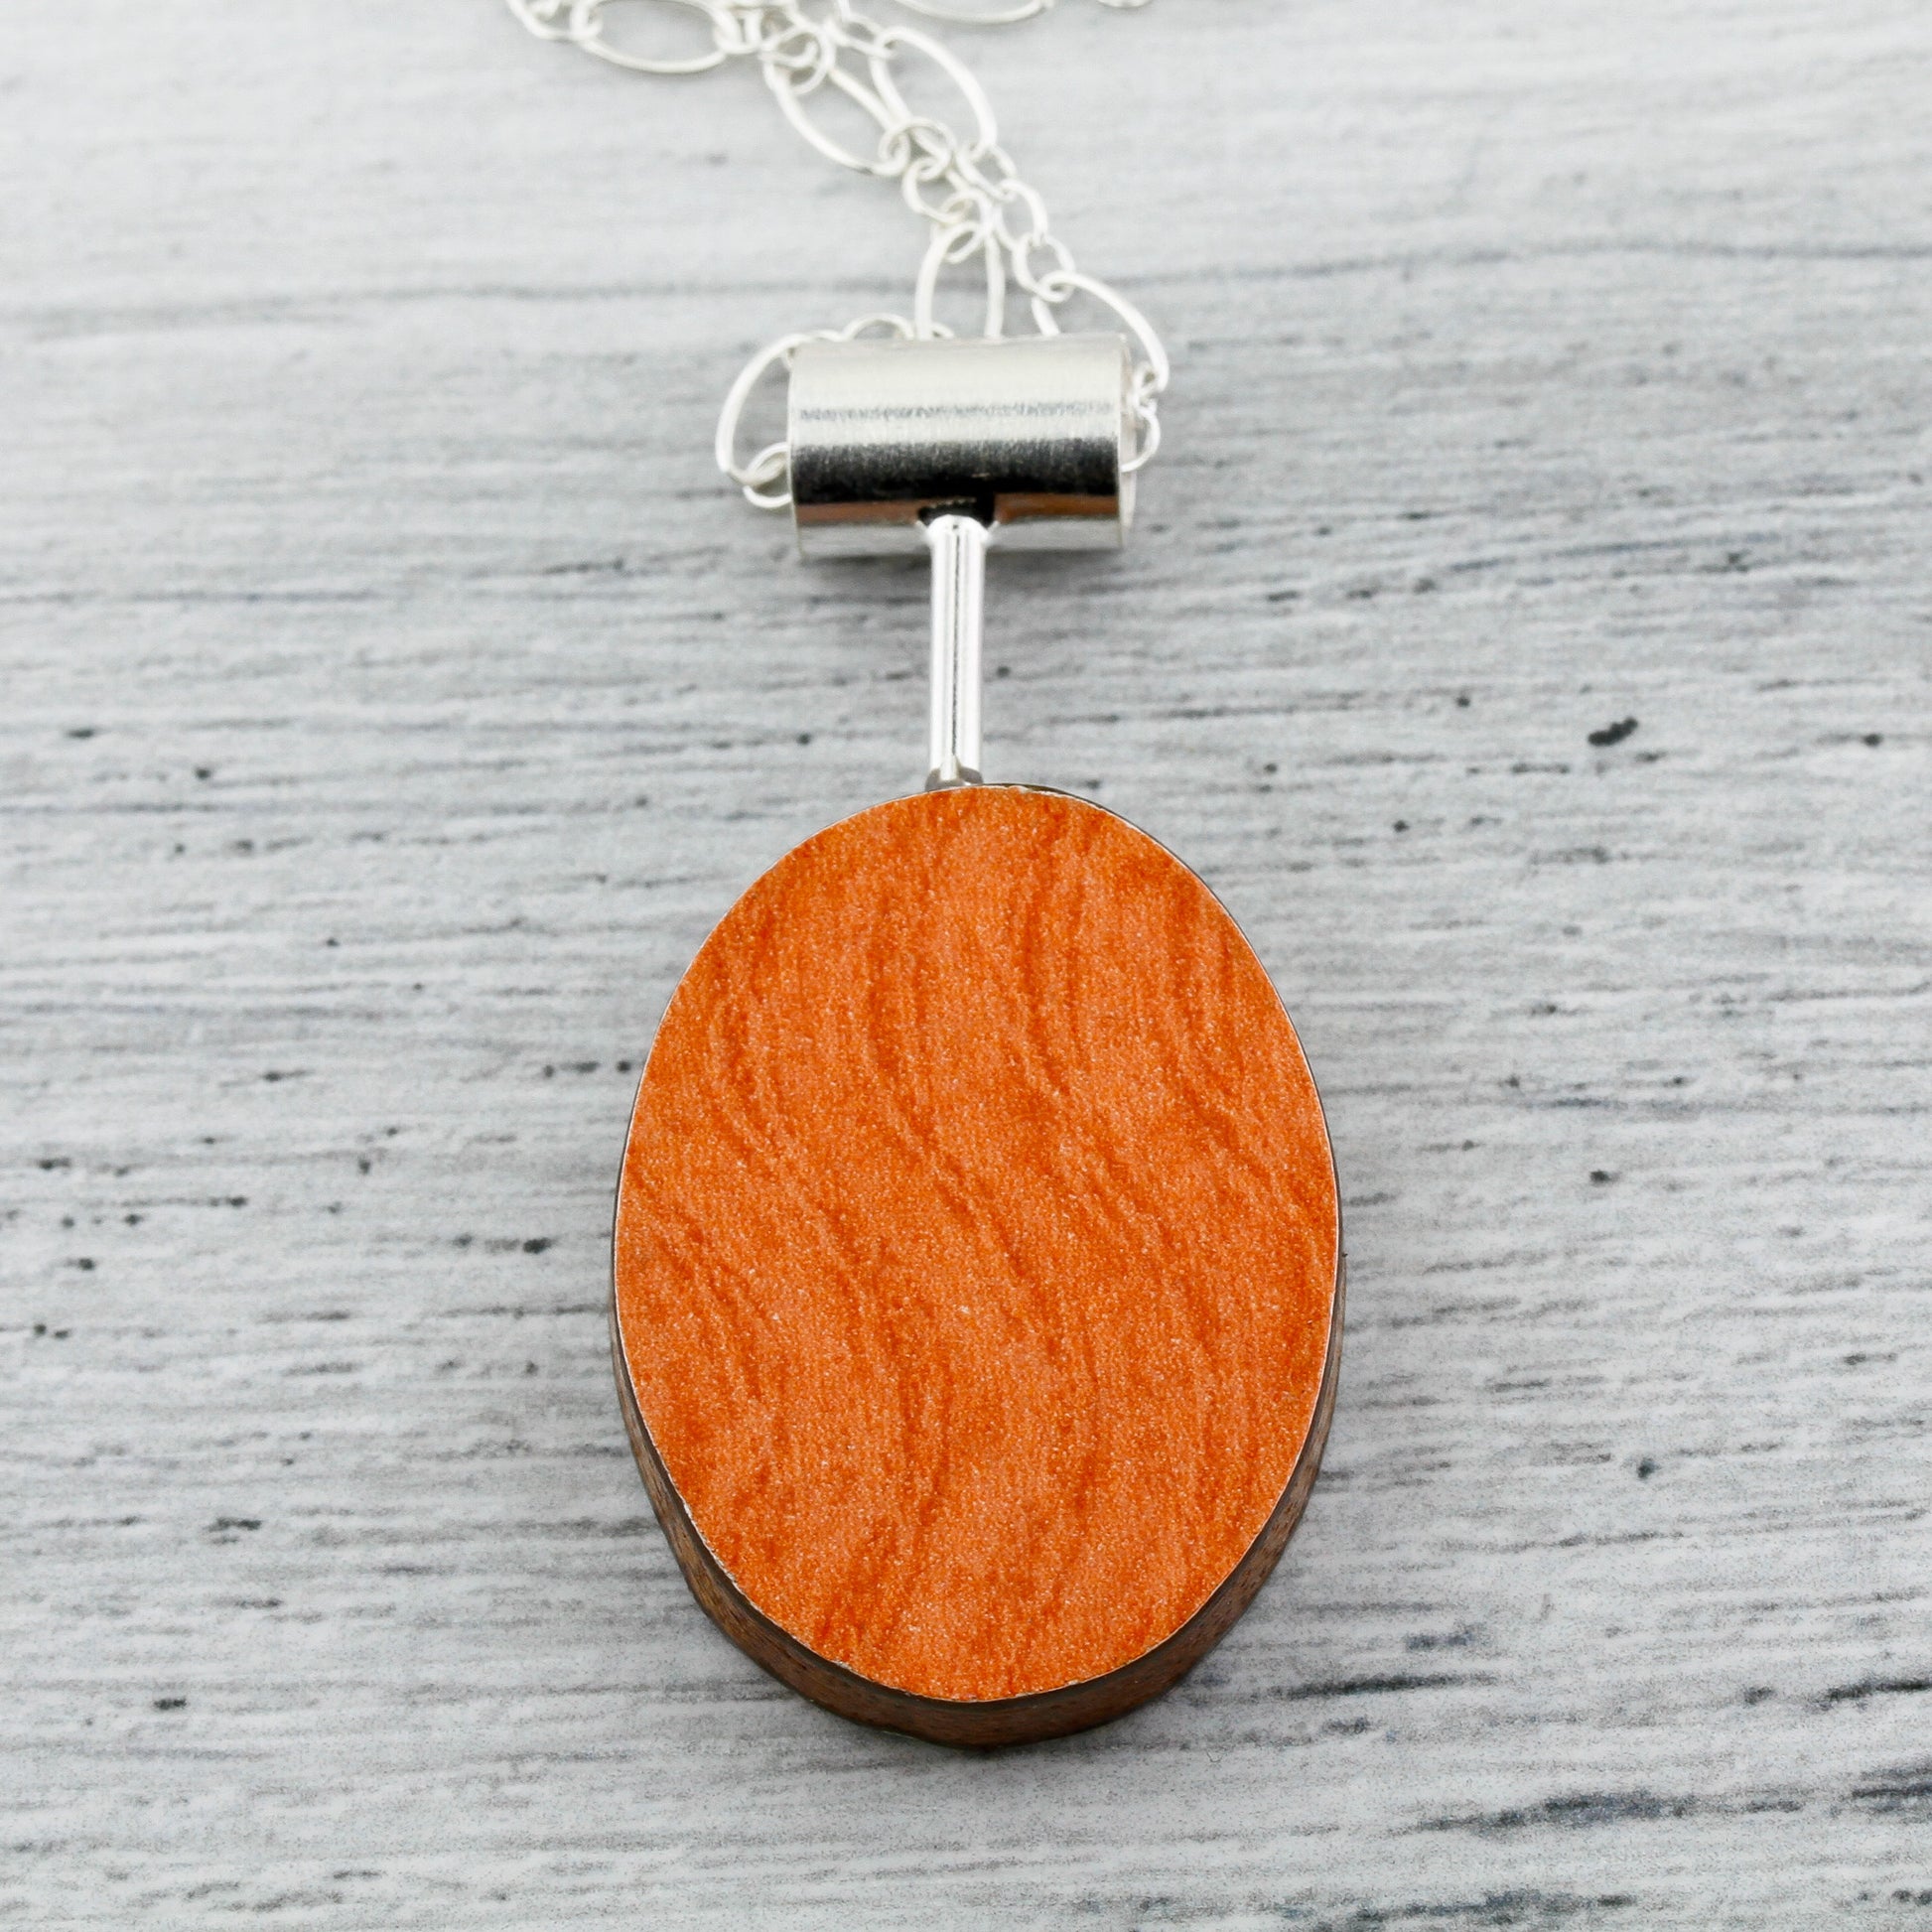 Orange side of oval shaped contemporary art jewelry with laminate on wood